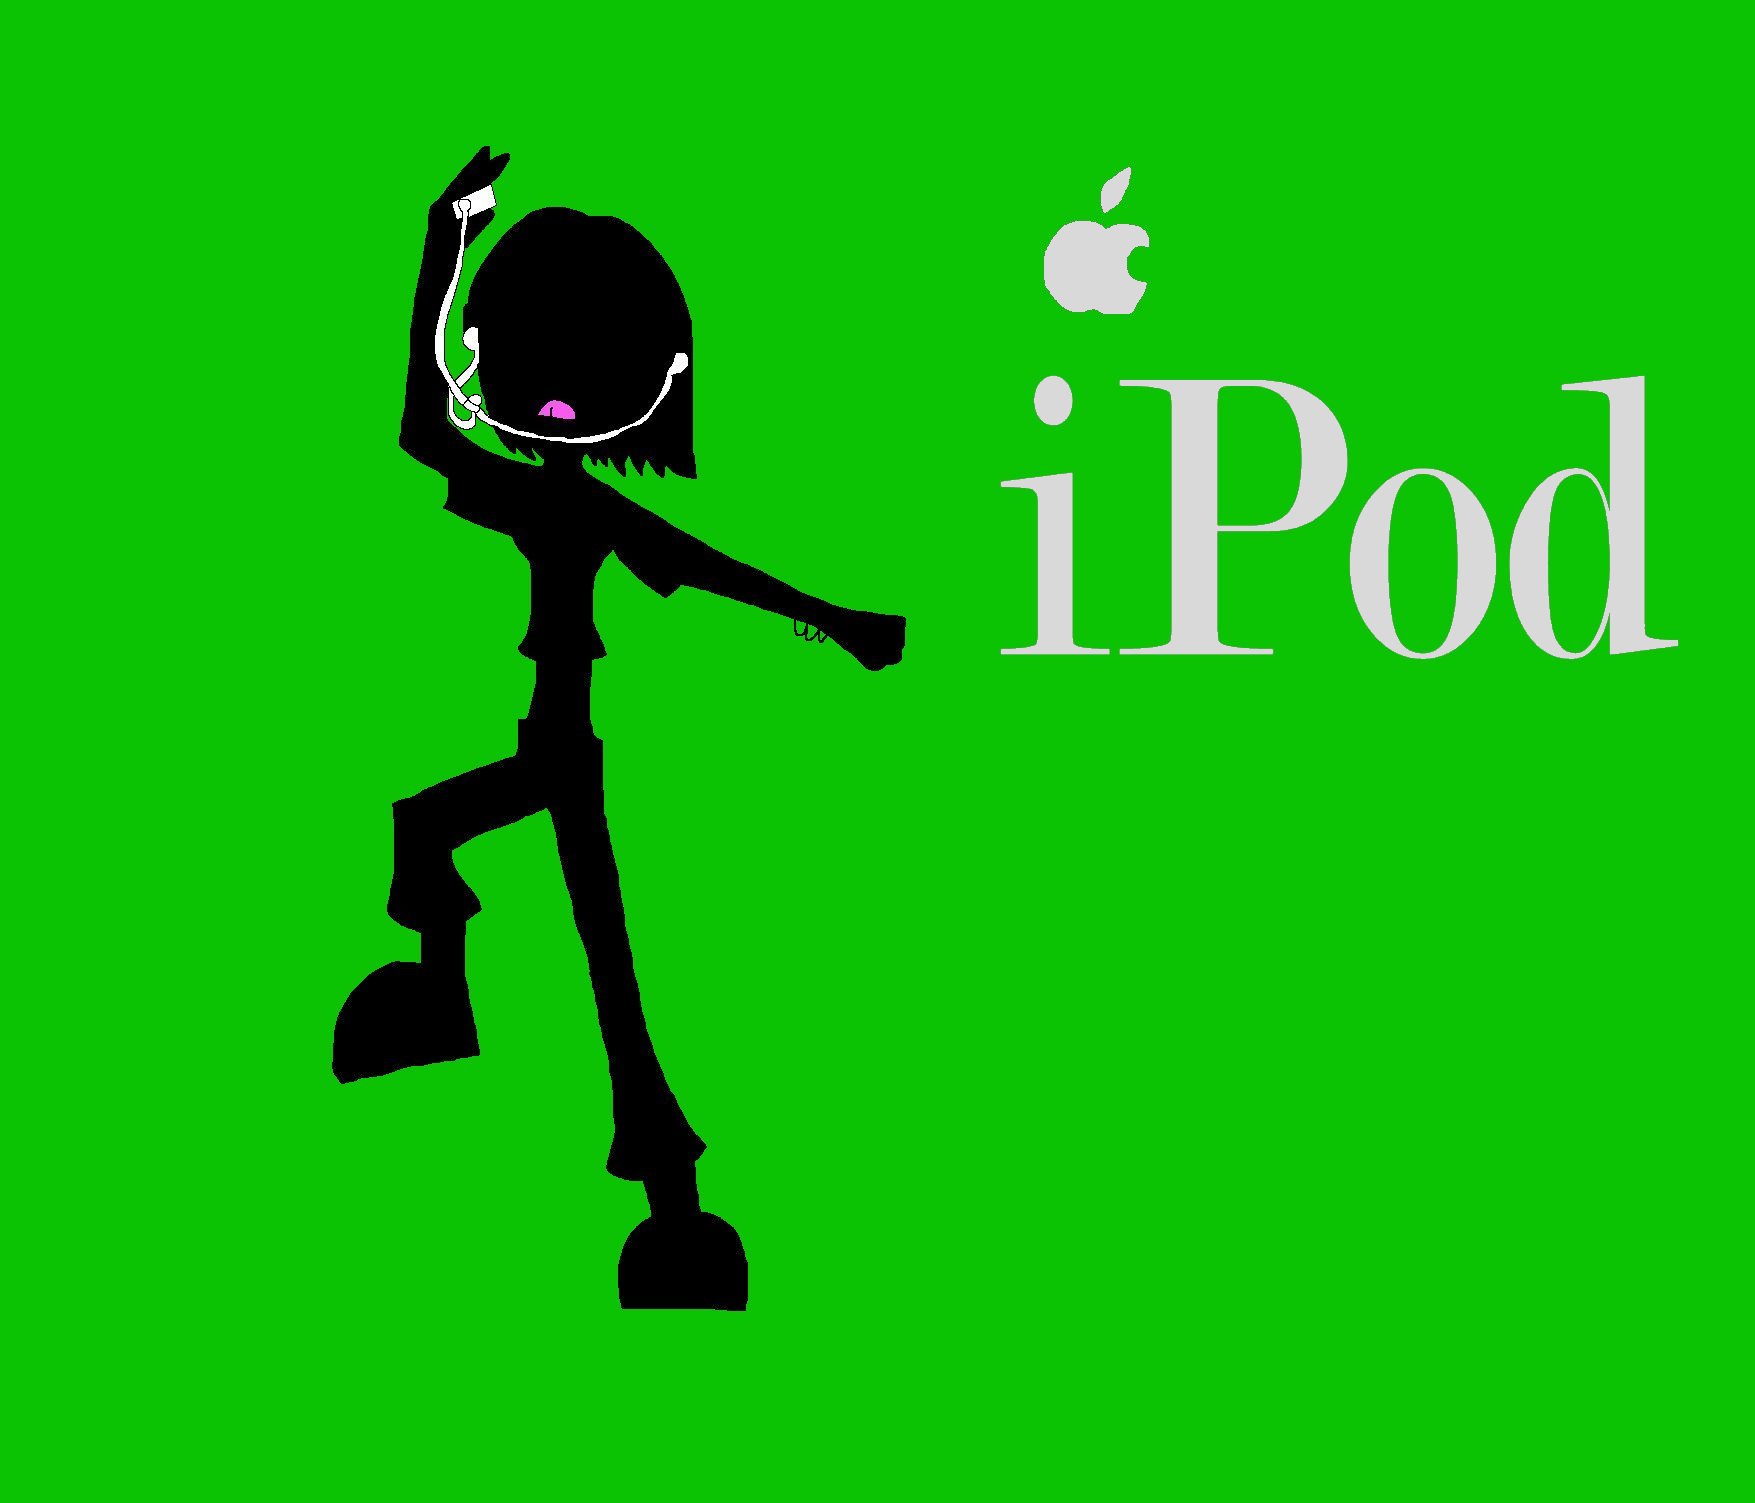 ipod series 2 by CrAzY_fish101